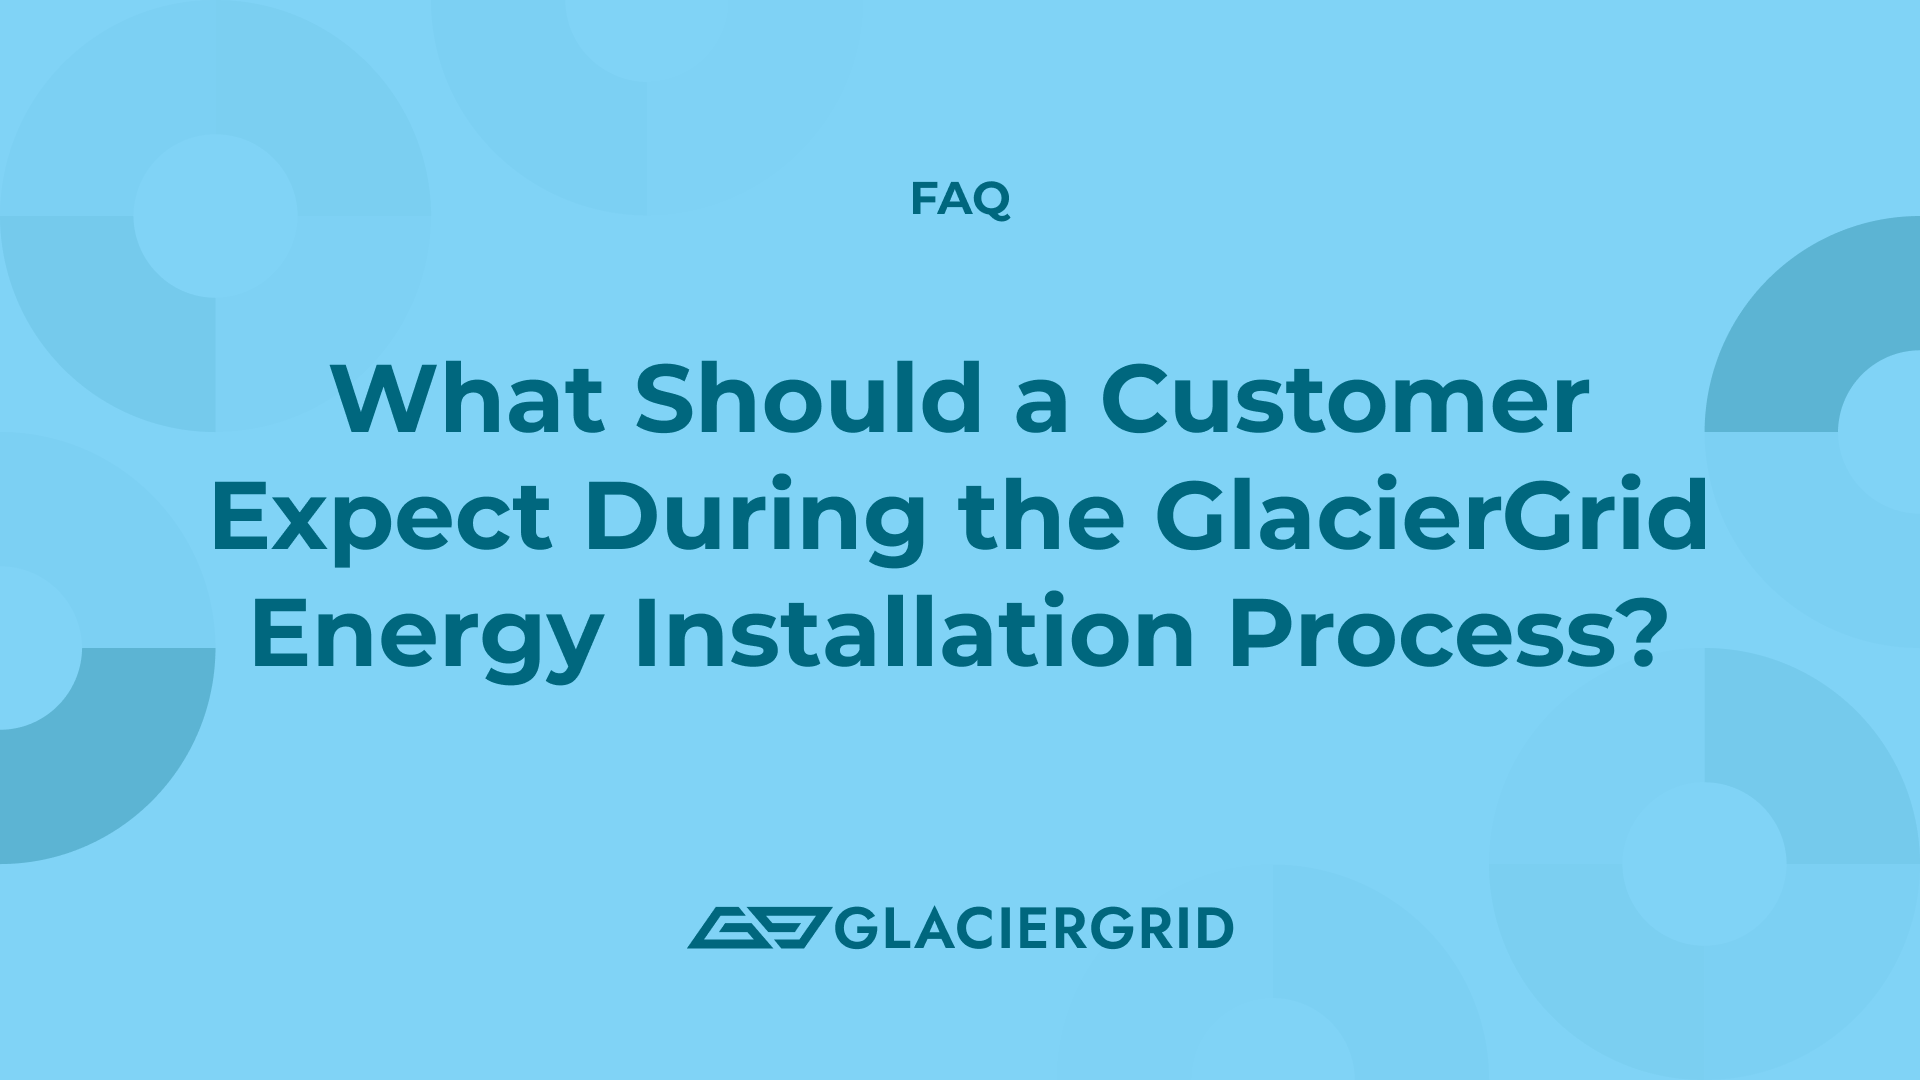 What Should a Customer Expect During the GlacierGrid Energy Installation Process?